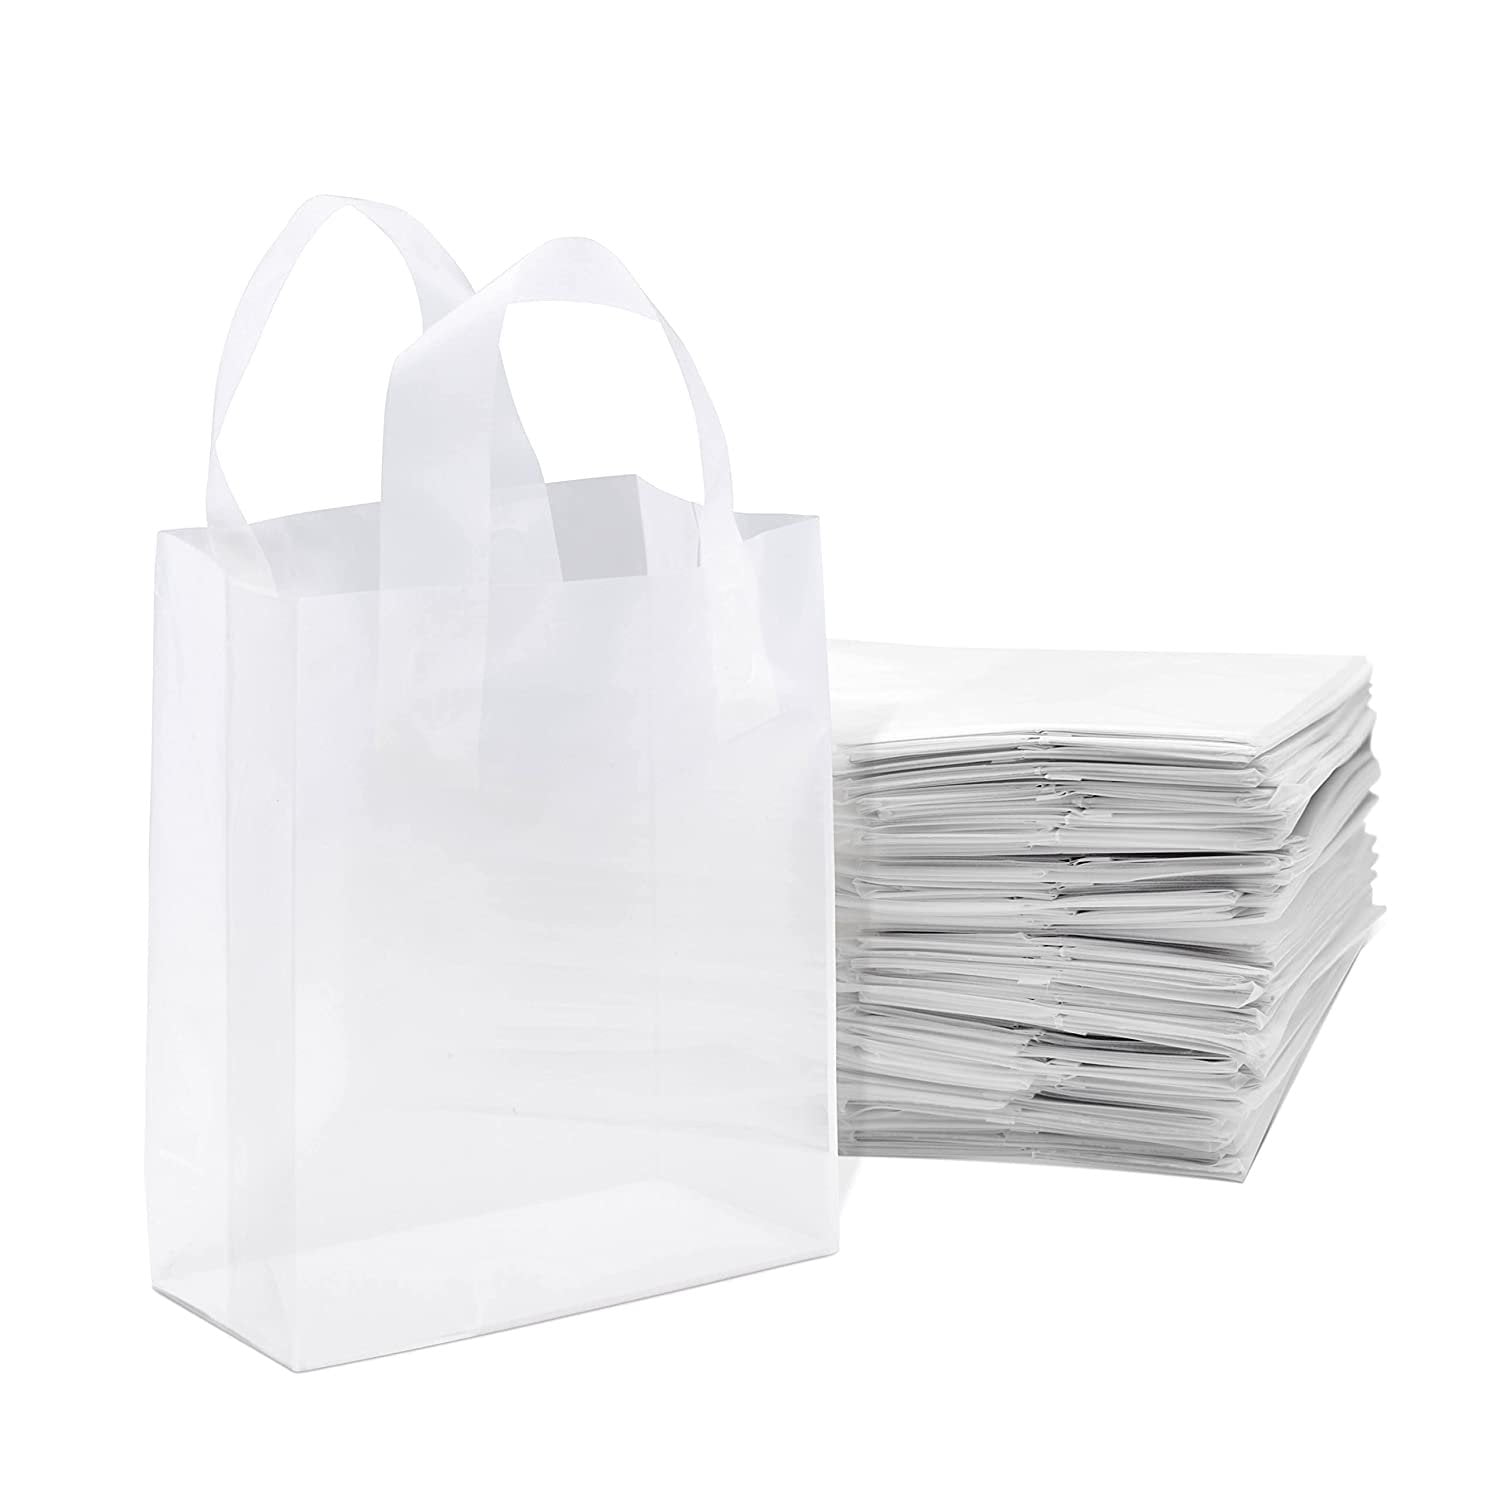 25 WHITE CHILDRENS PAPER PARTY ART CRAFT CARRIER BAGS SOS 